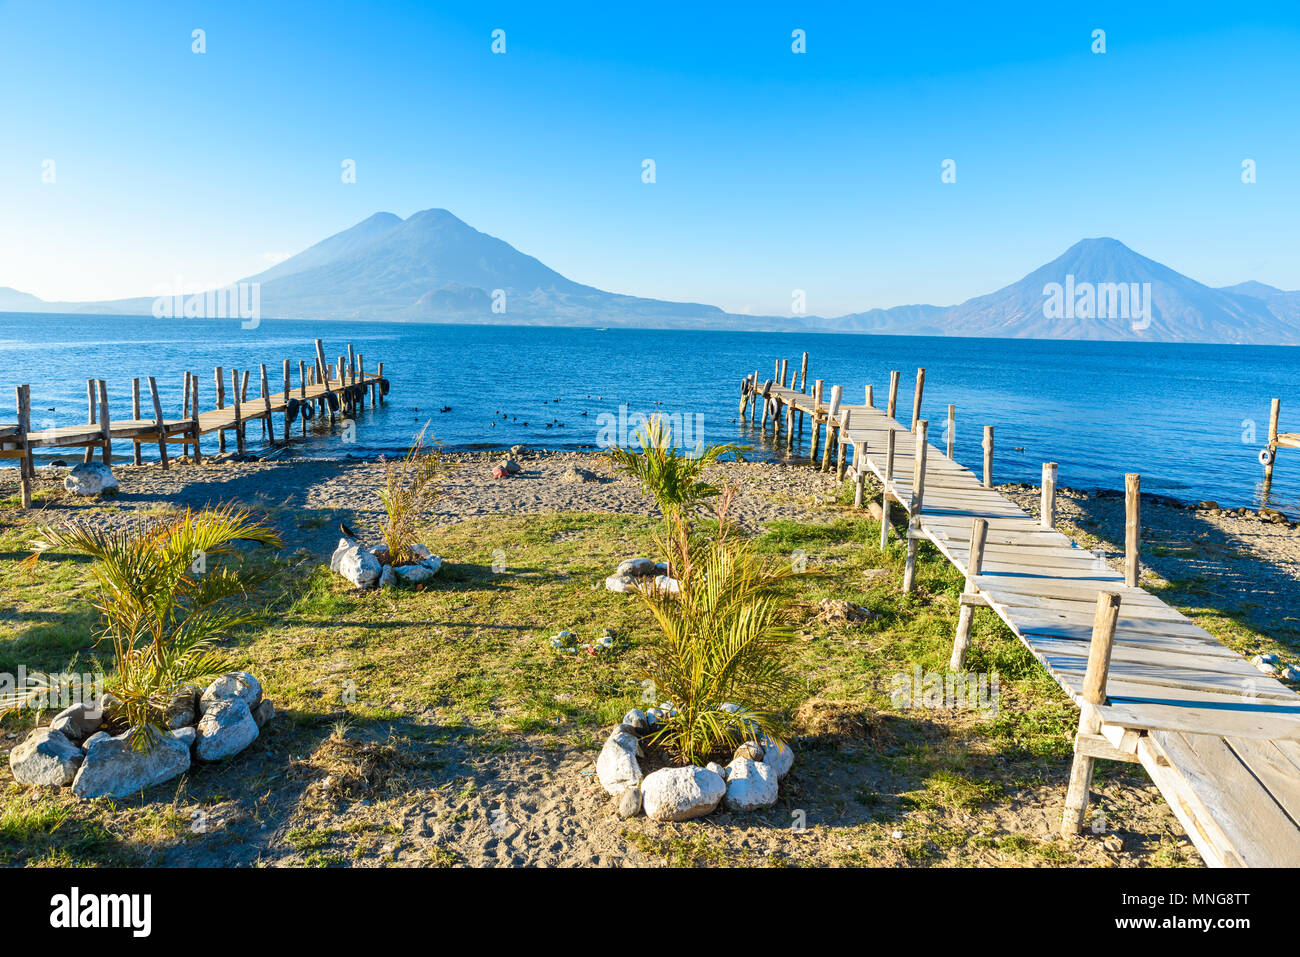 Wooden pier at Lake Atitlan on the beach in Panajachel, Guatemala.  With beautiful landscape scenery of volcanoes Toliman, Atitlan and San Pedro in th Stock Photo